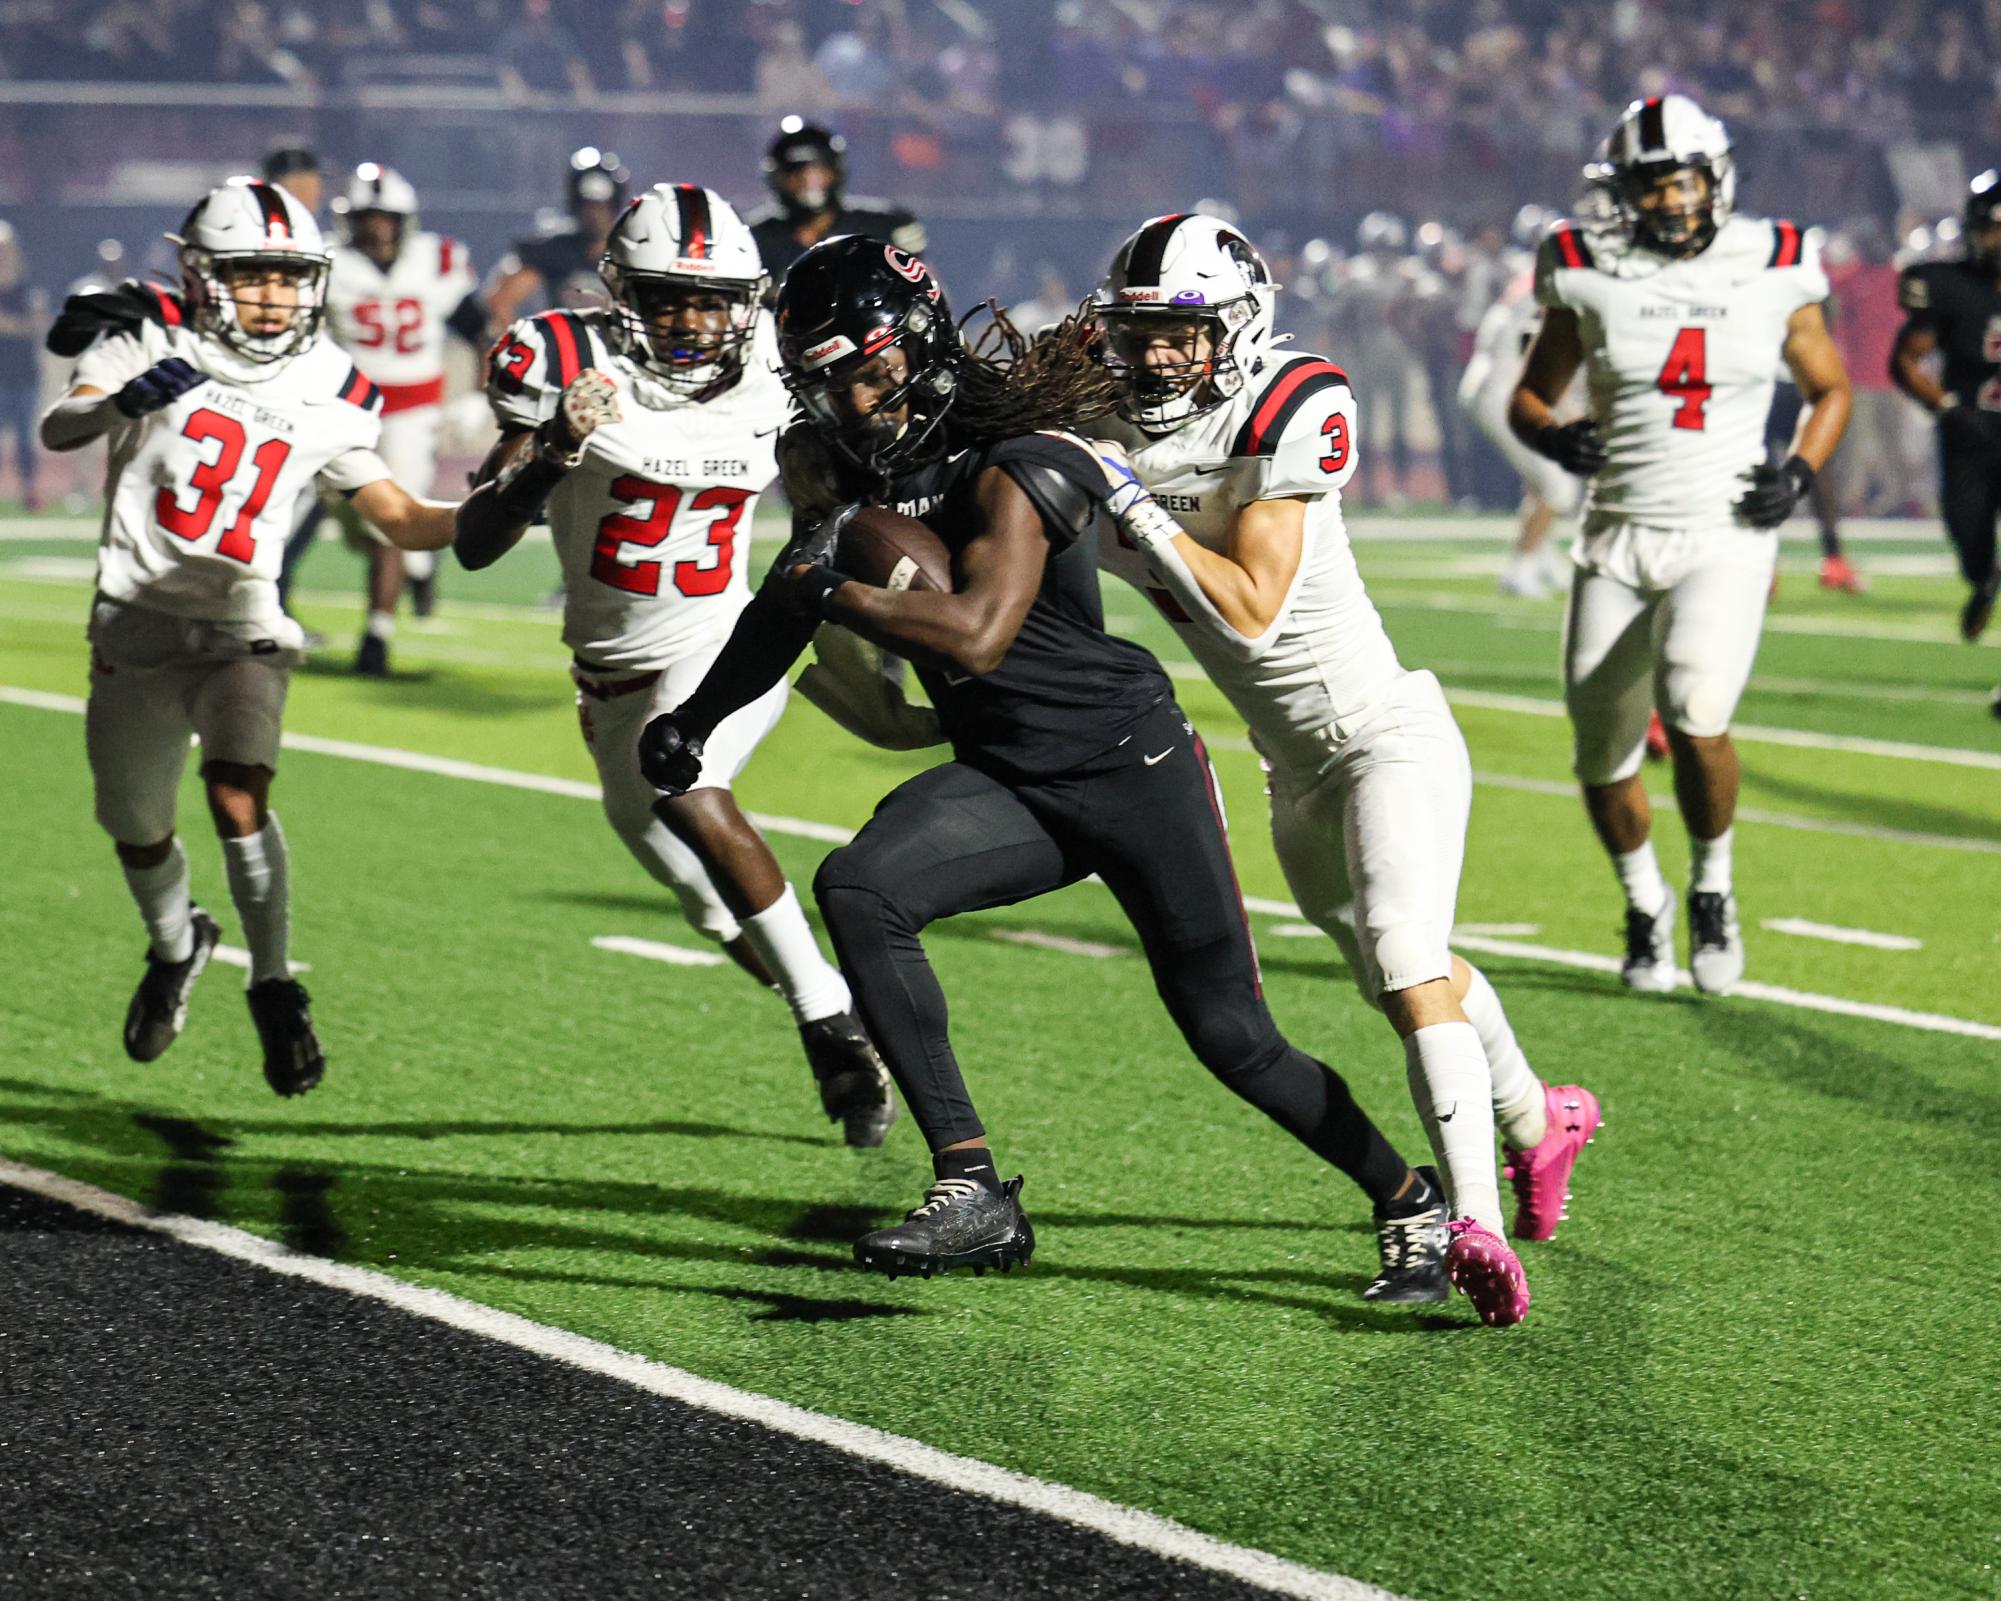 With a Hazel Green defender hanging on, junior Jon Rozier crosses into the end zone. Rozier scored the first touchdown in the game. 